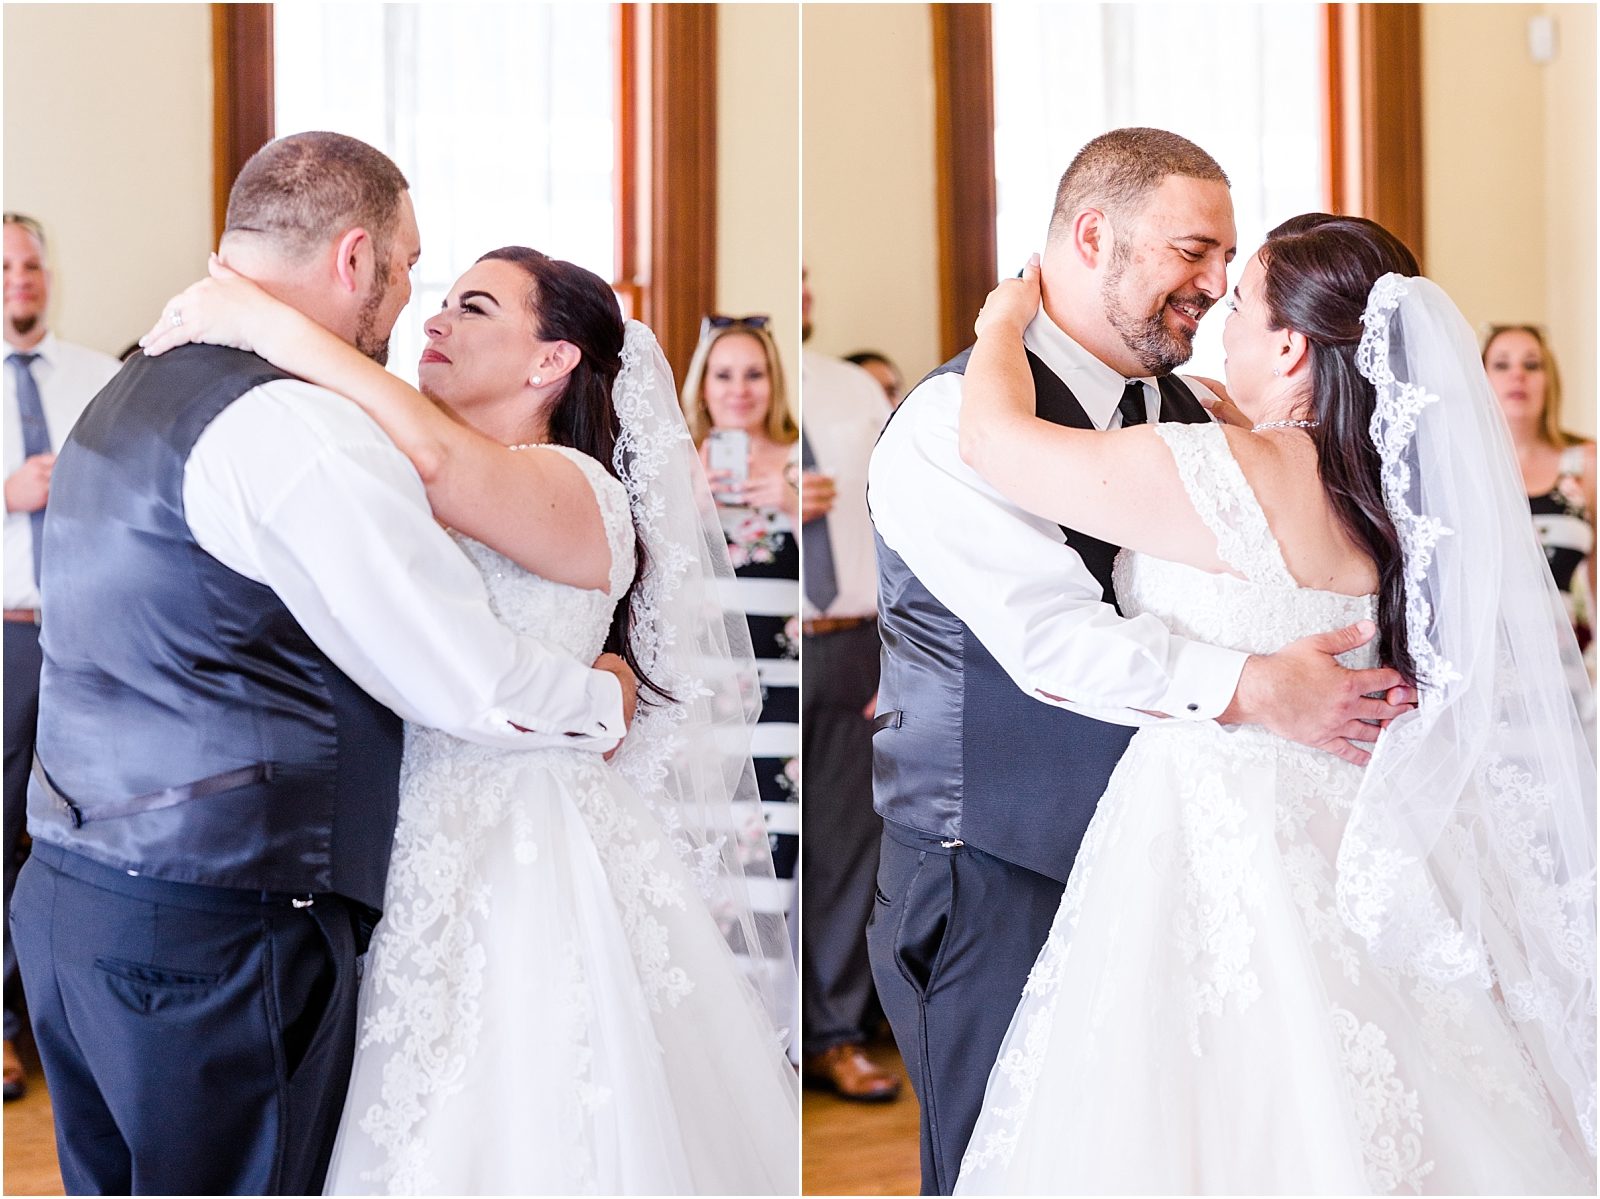 Bride and groom share a first dance.